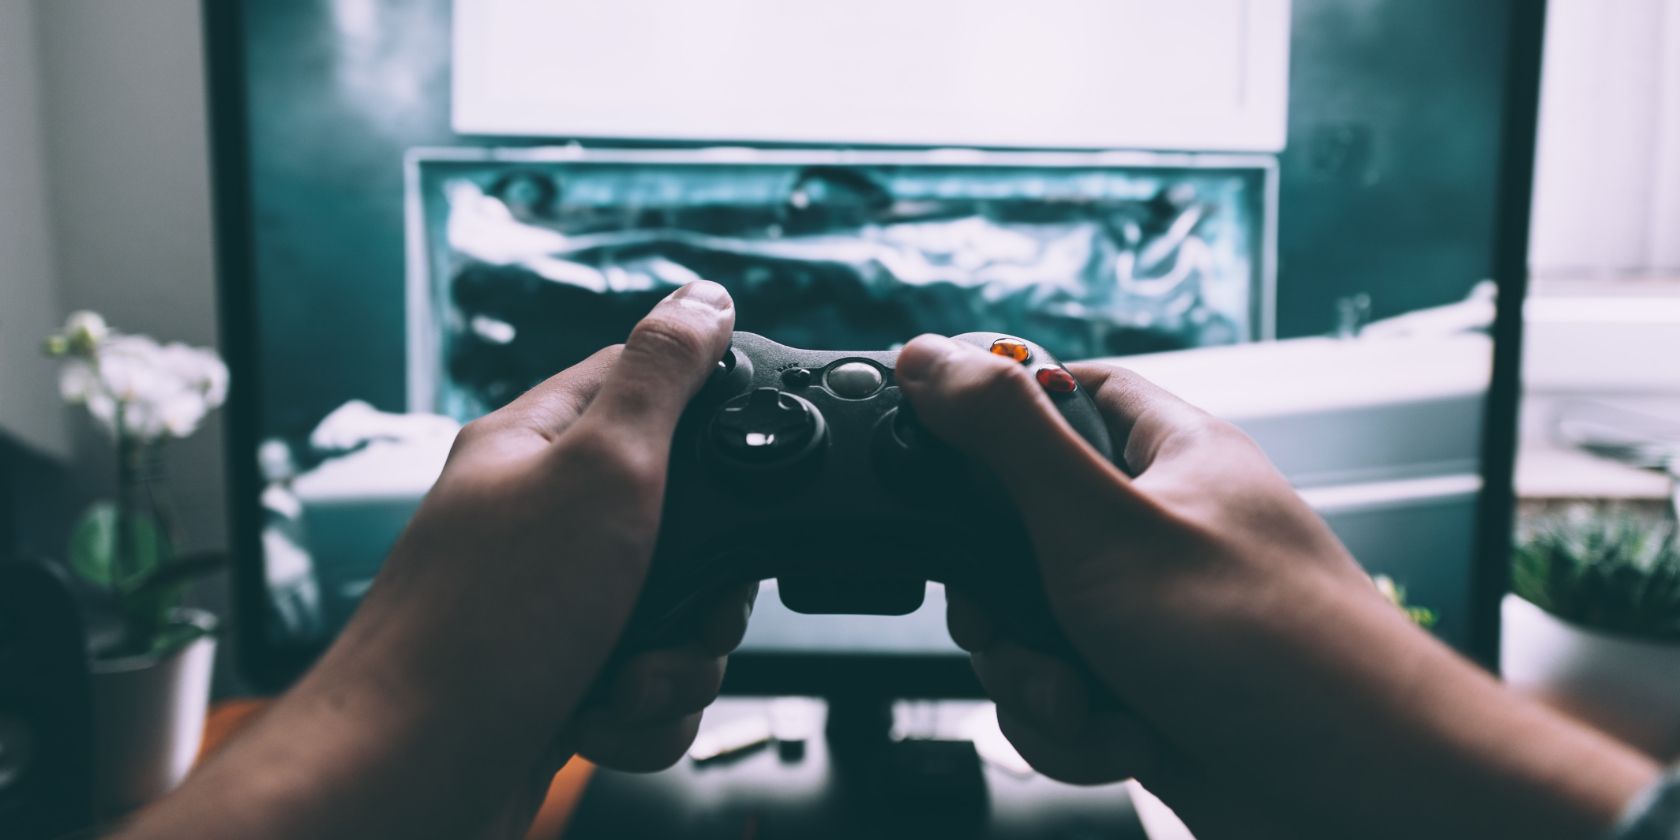 Hands holding a video game controller in front of TV